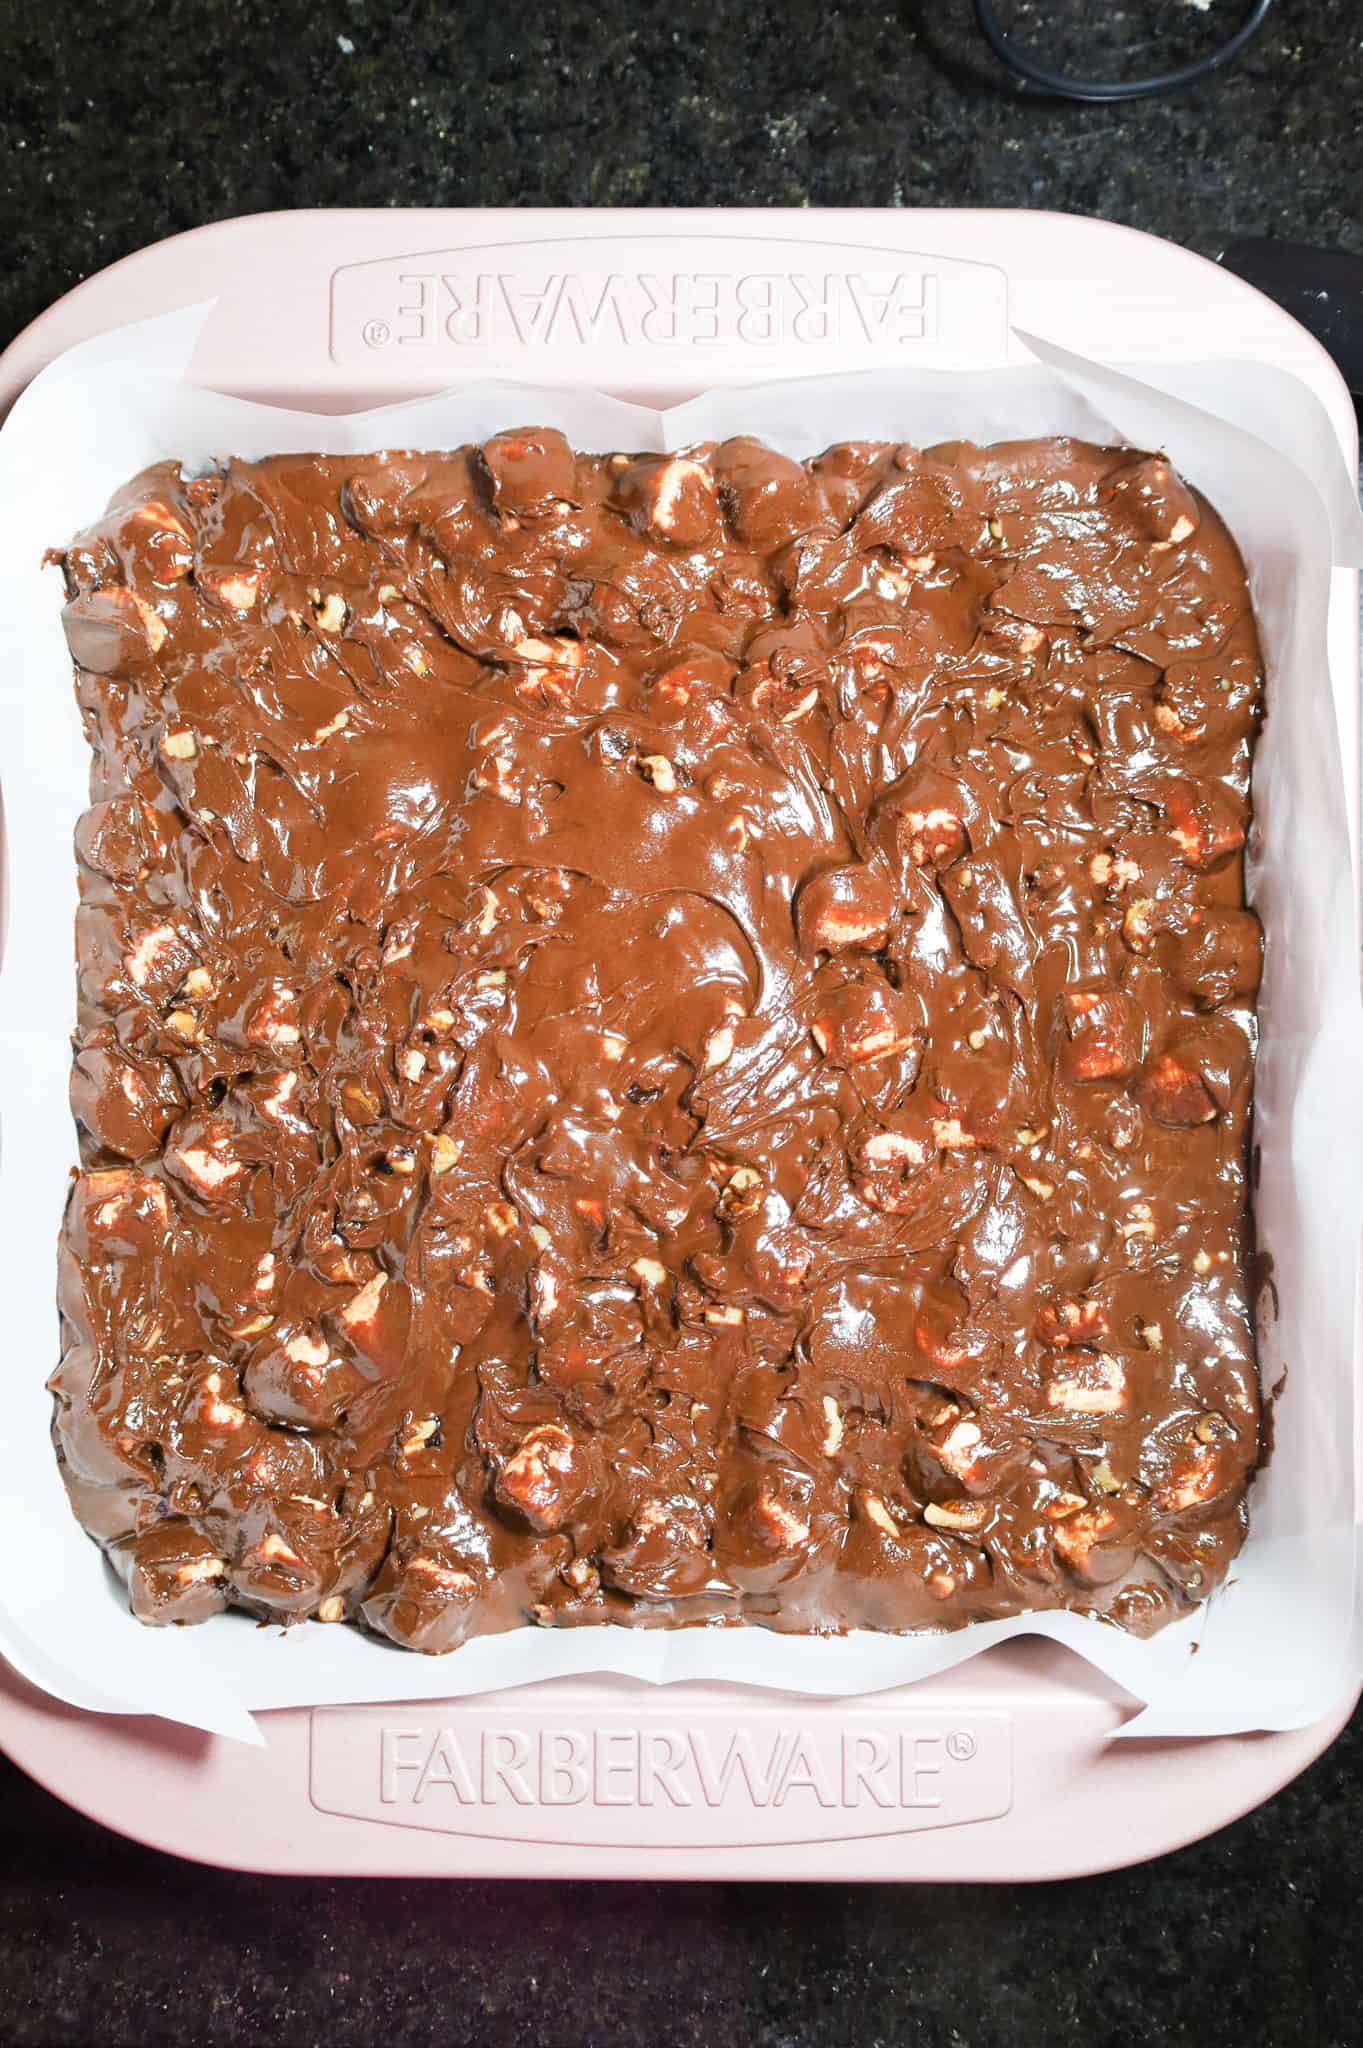 rocky road fudge mixture poured into parchment lined baking dish